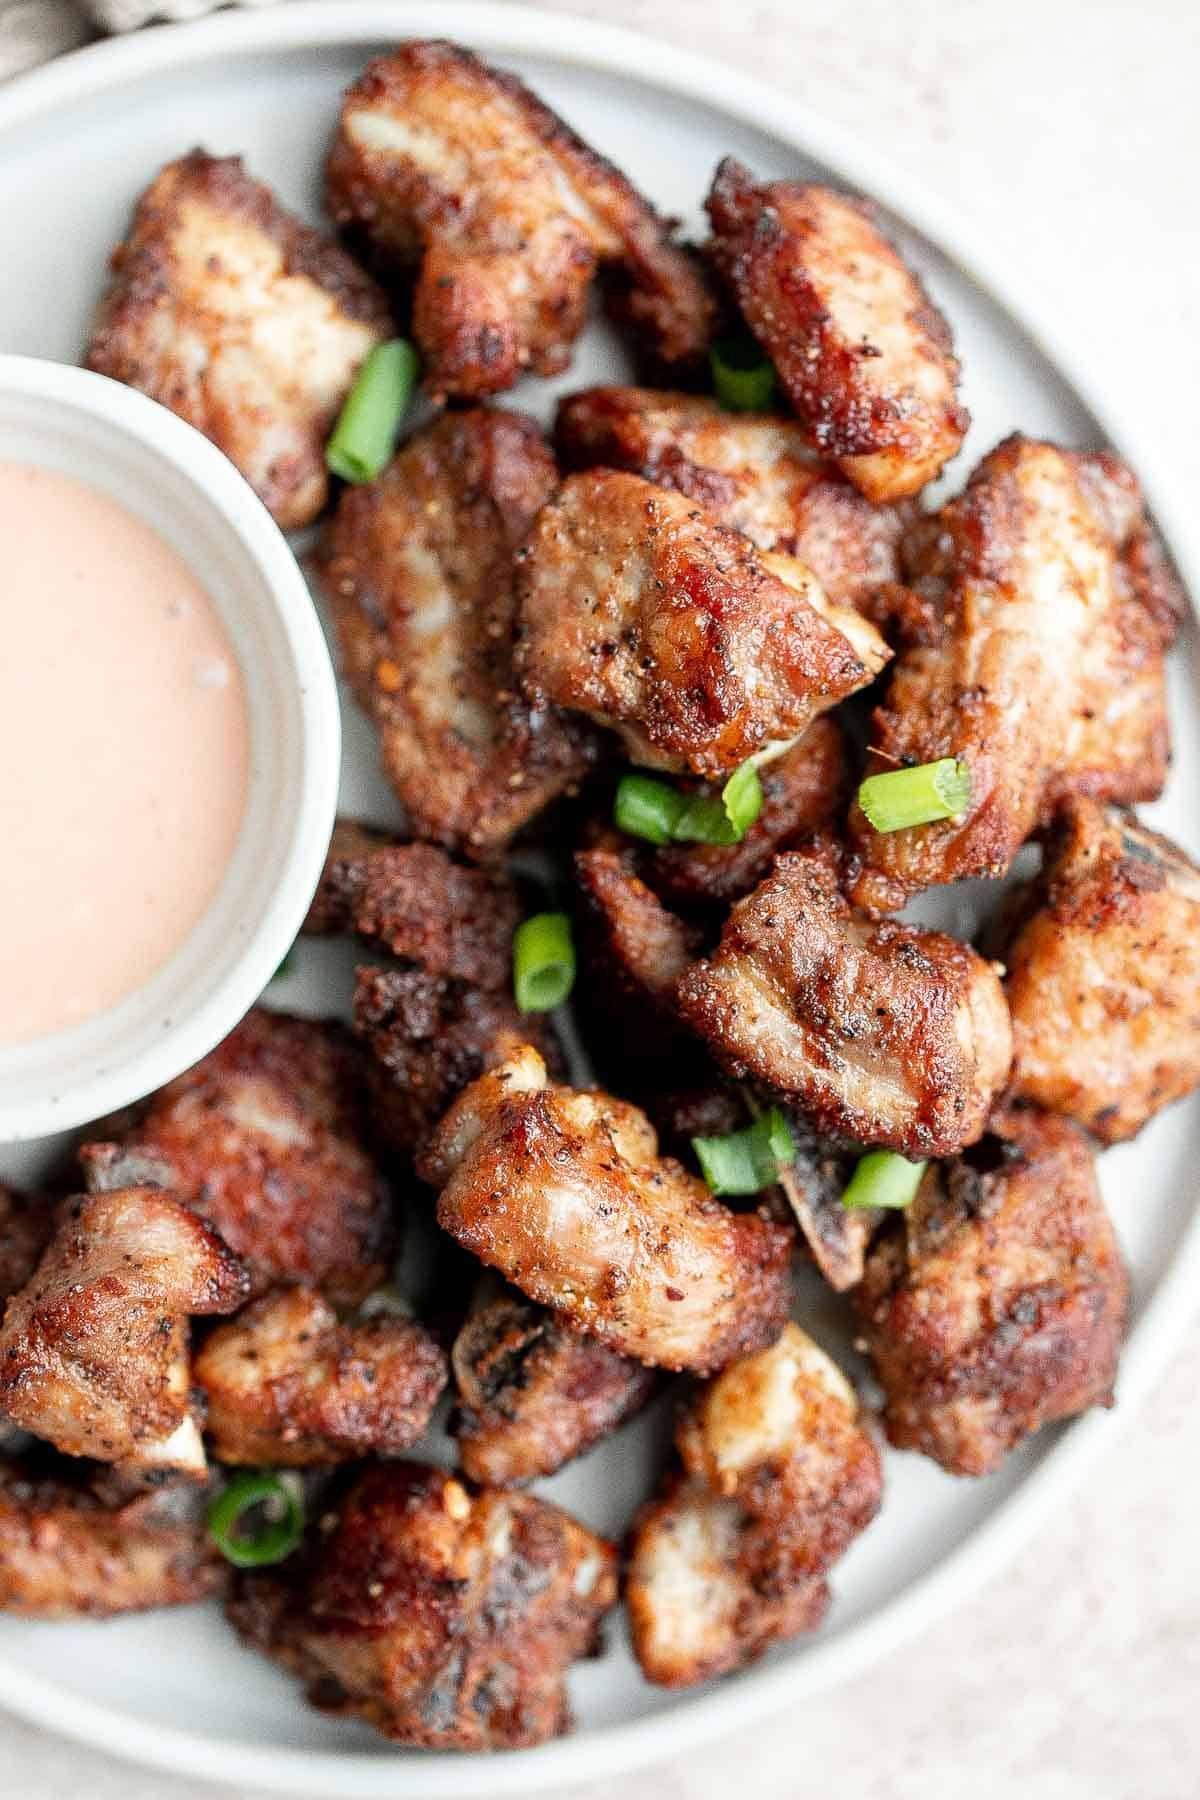 Air fryer short ribs are crispy, flavorful, and delicious. The easy marinade ensures they're tender and juicy inside, while the air fryer makes them crispy. | aheadofthyme.com